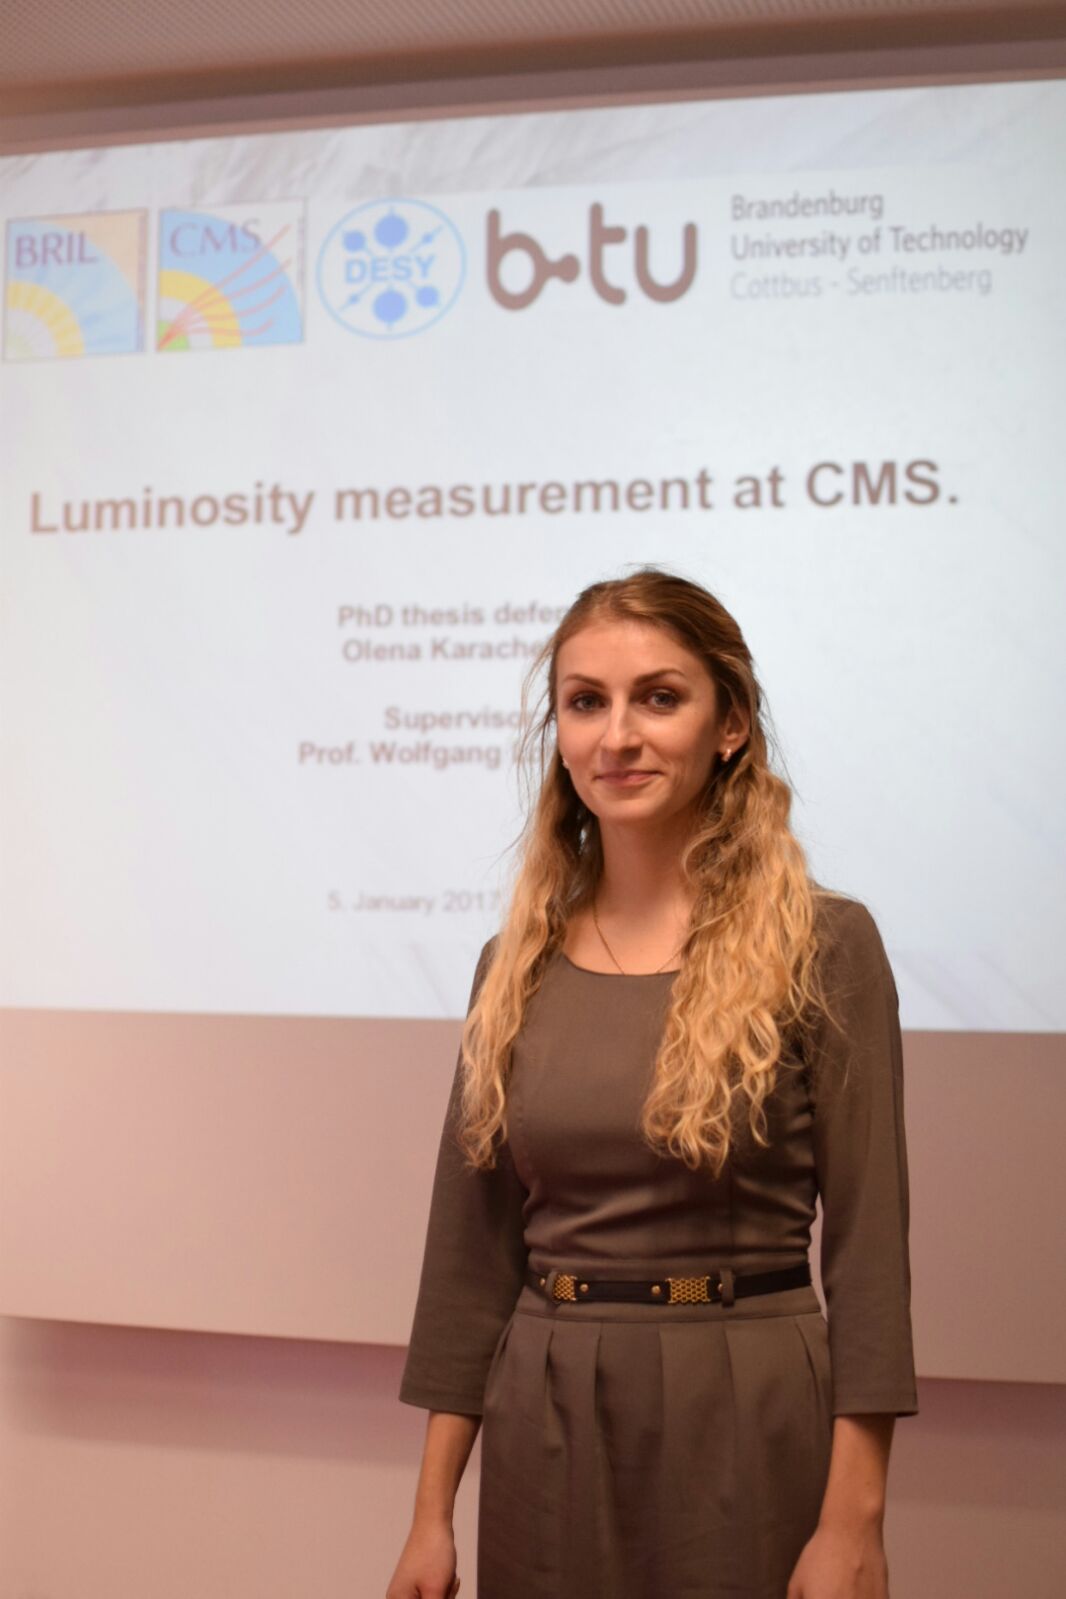 The young physicist during a presentation on luminosity measurement at CMS.